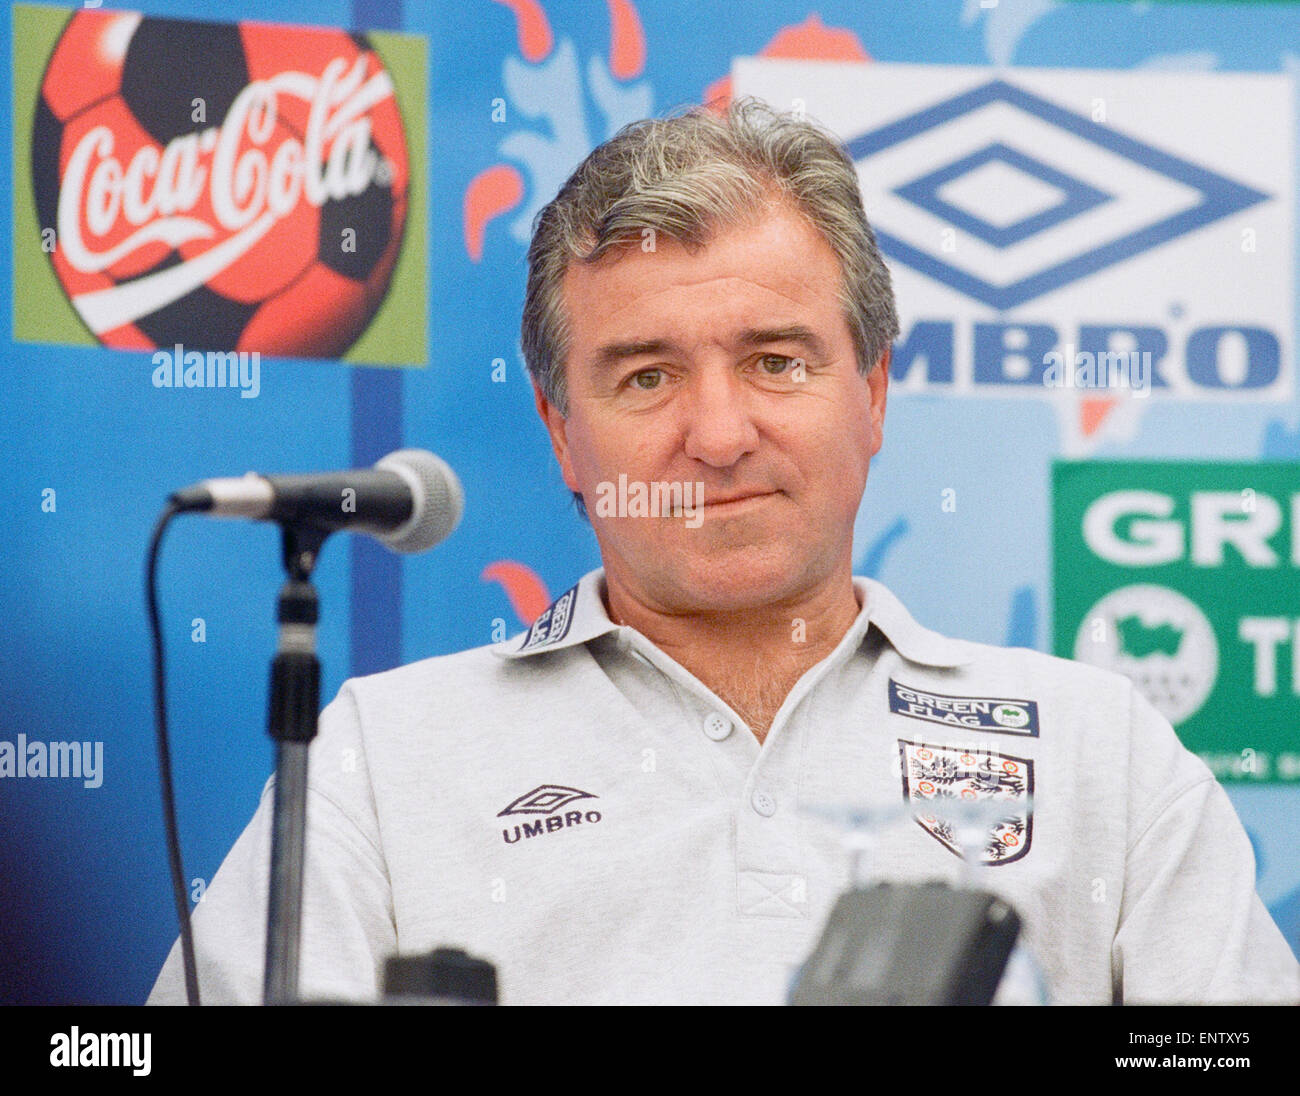 england-manager-terry-venables-at-an-england-press-conference-during-ENTXY5.jpg